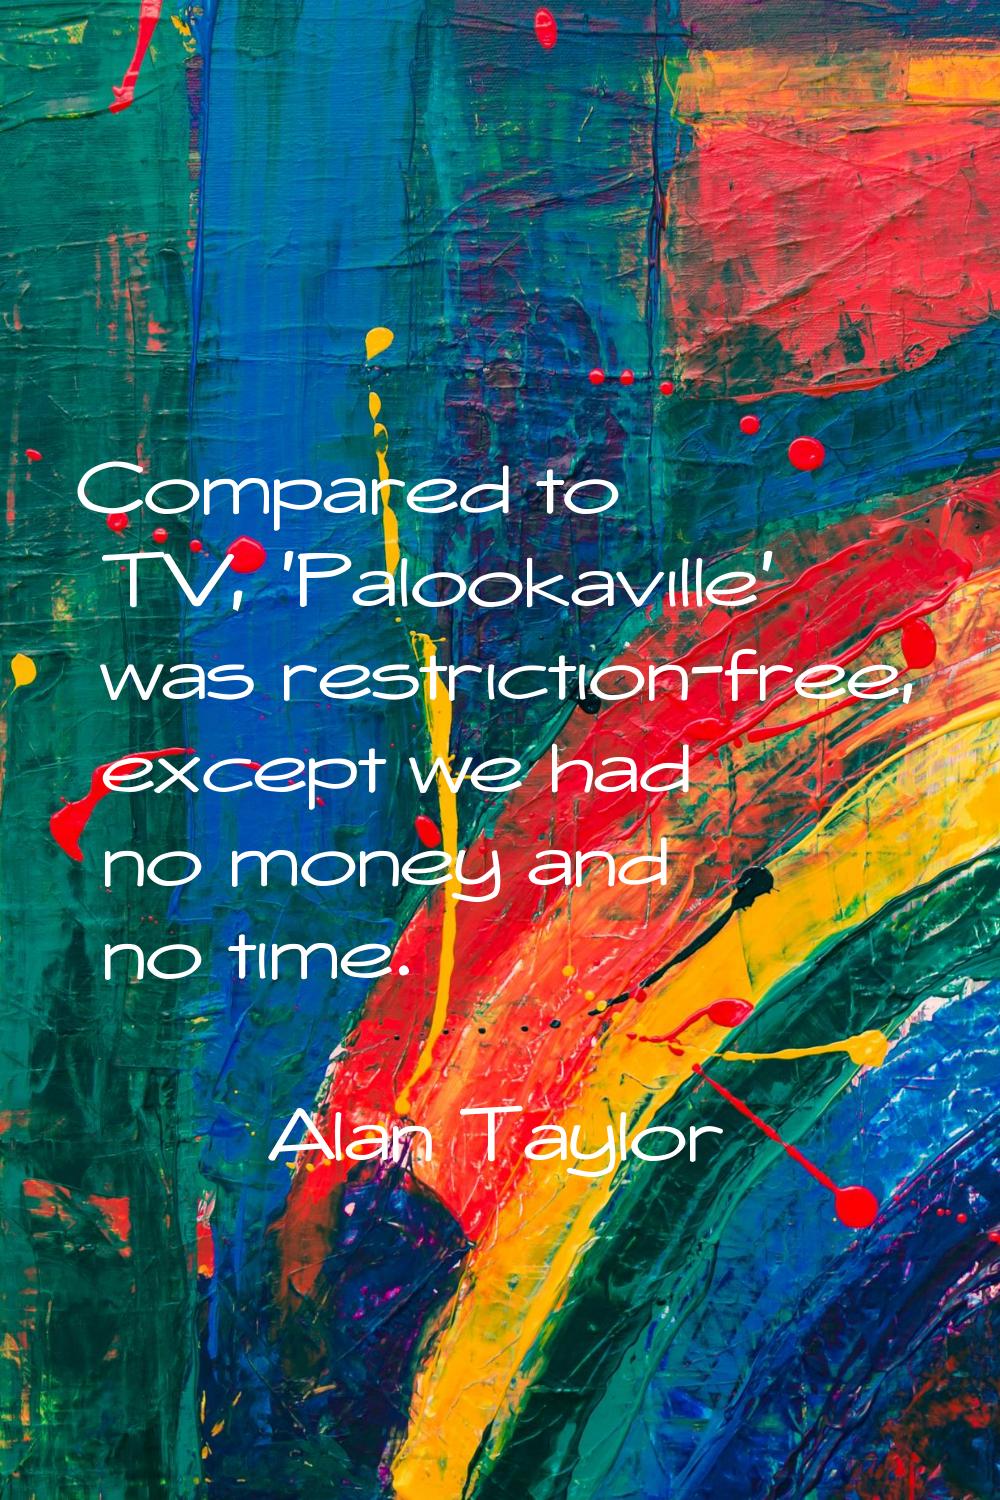 Compared to TV, 'Palookaville' was restriction-free, except we had no money and no time.